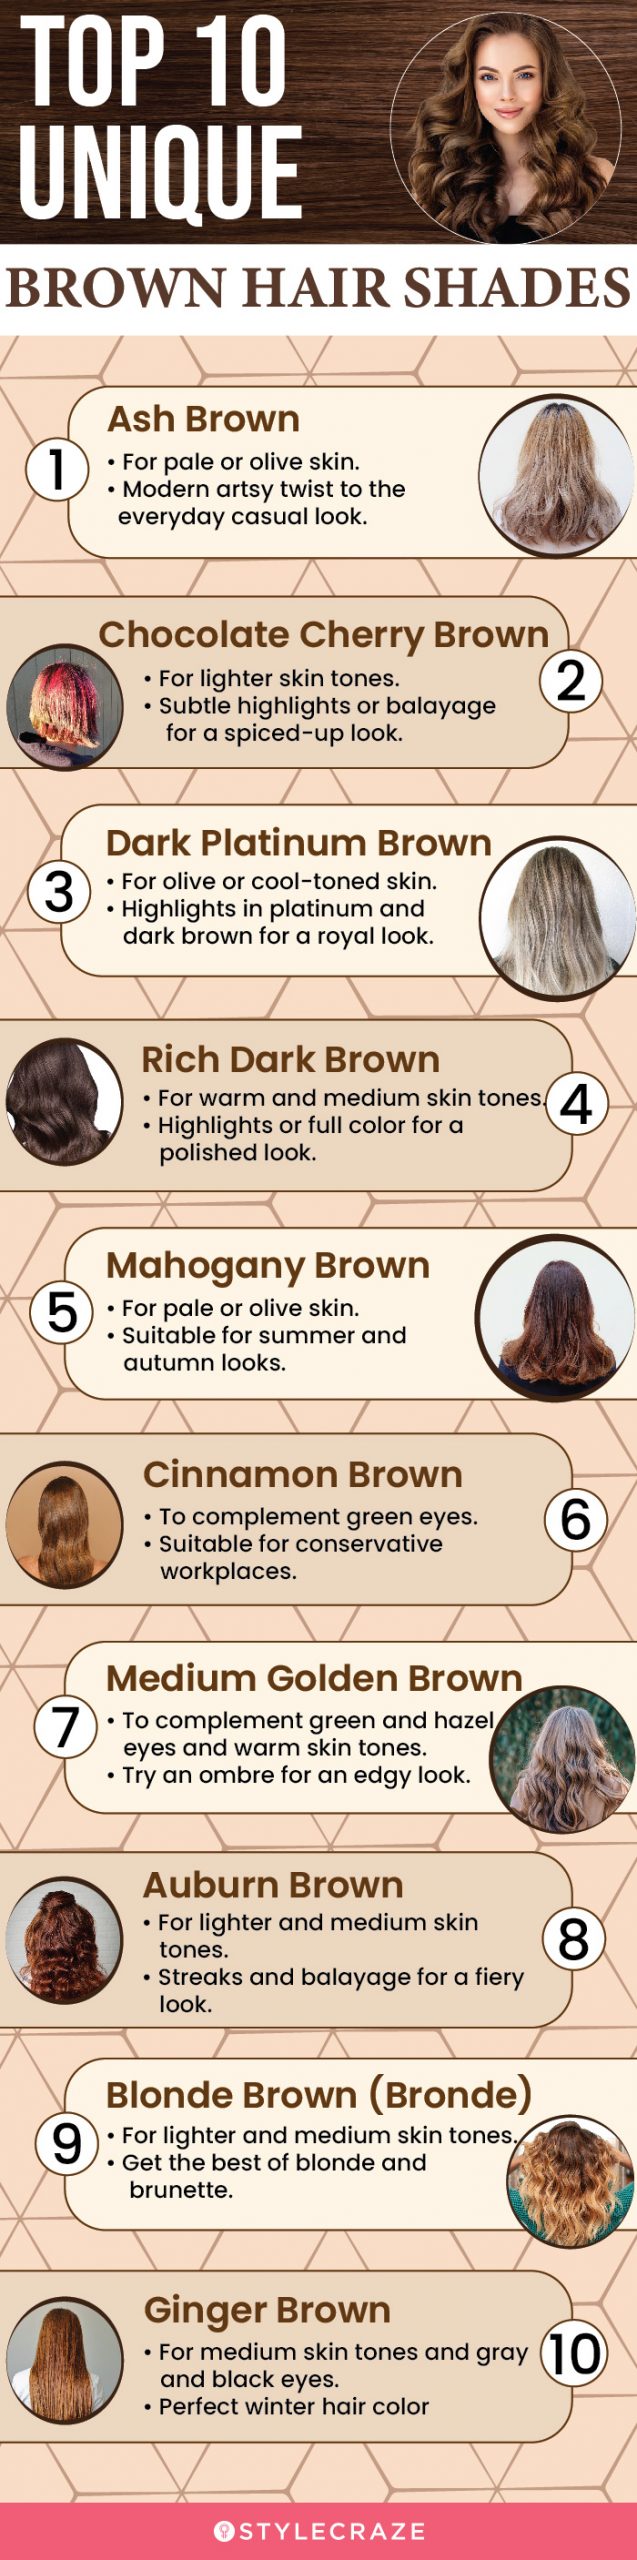 top 10 unique brown hair shades [infographic]